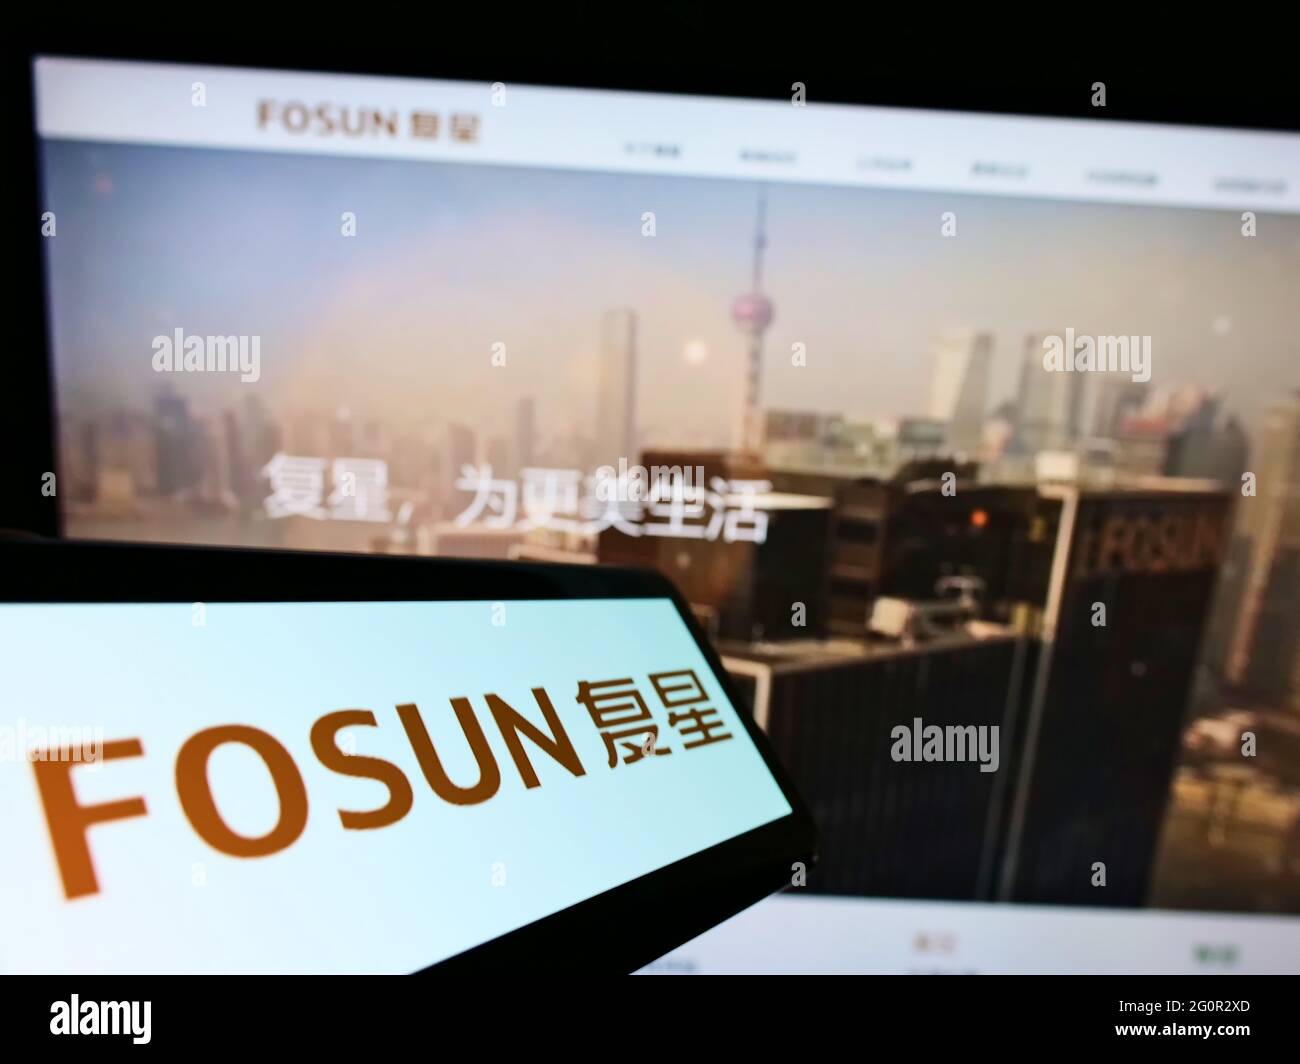 Mobile phone with logo of Chinese conglomerate Fosun International Limited on screen in front of web page. Focus on center-right of phone display. Stock Photo